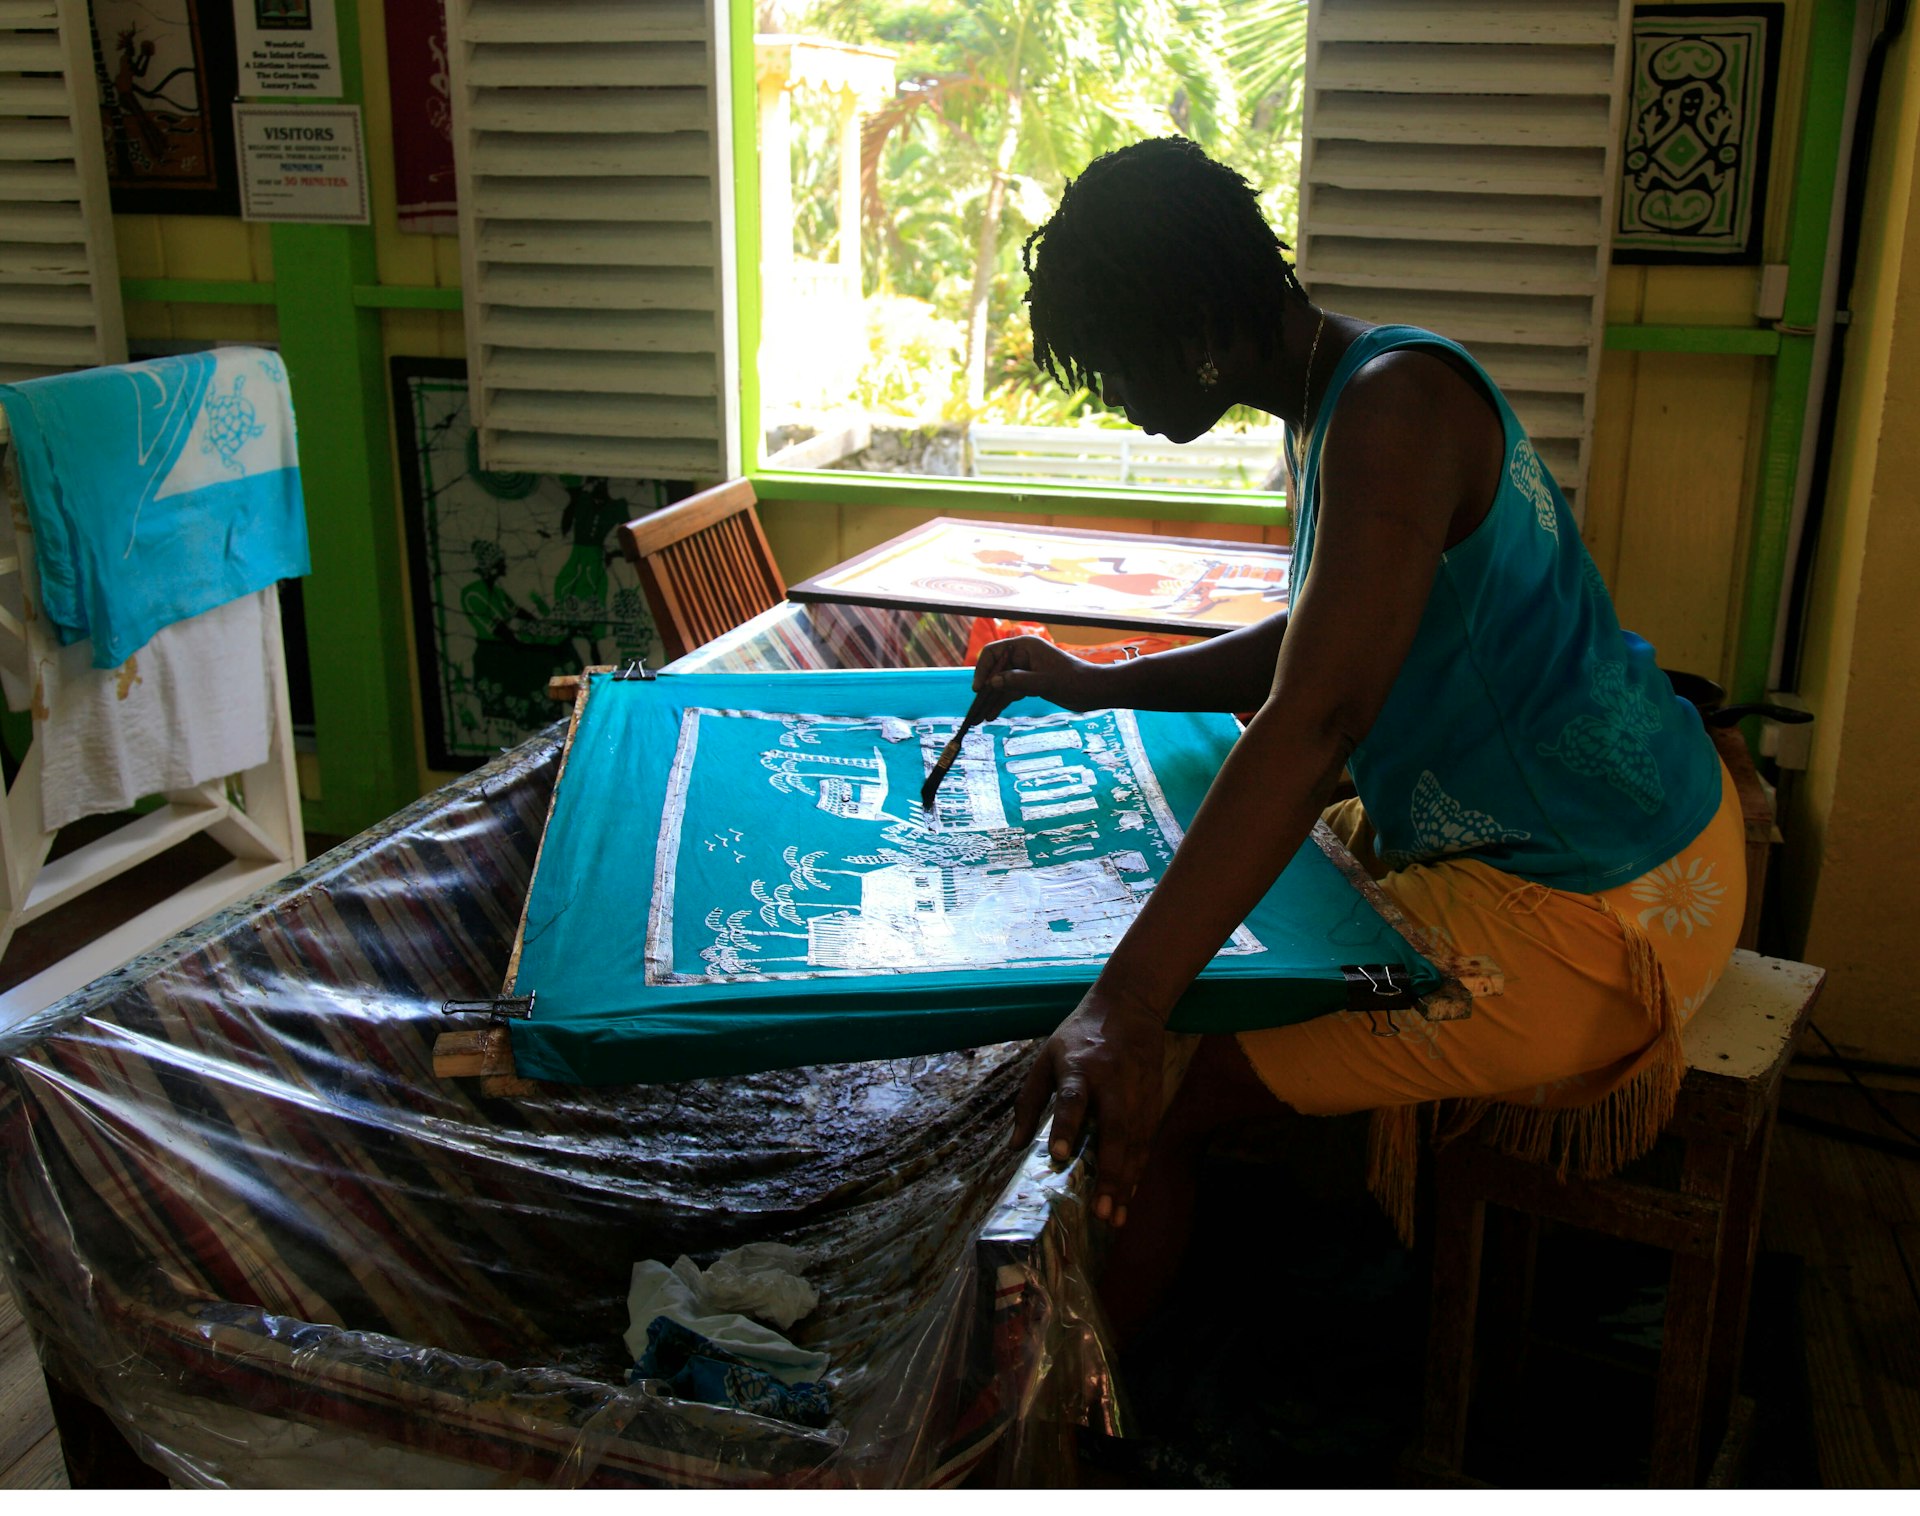 A woman paints on a piece of turquoise material stretched over a frame